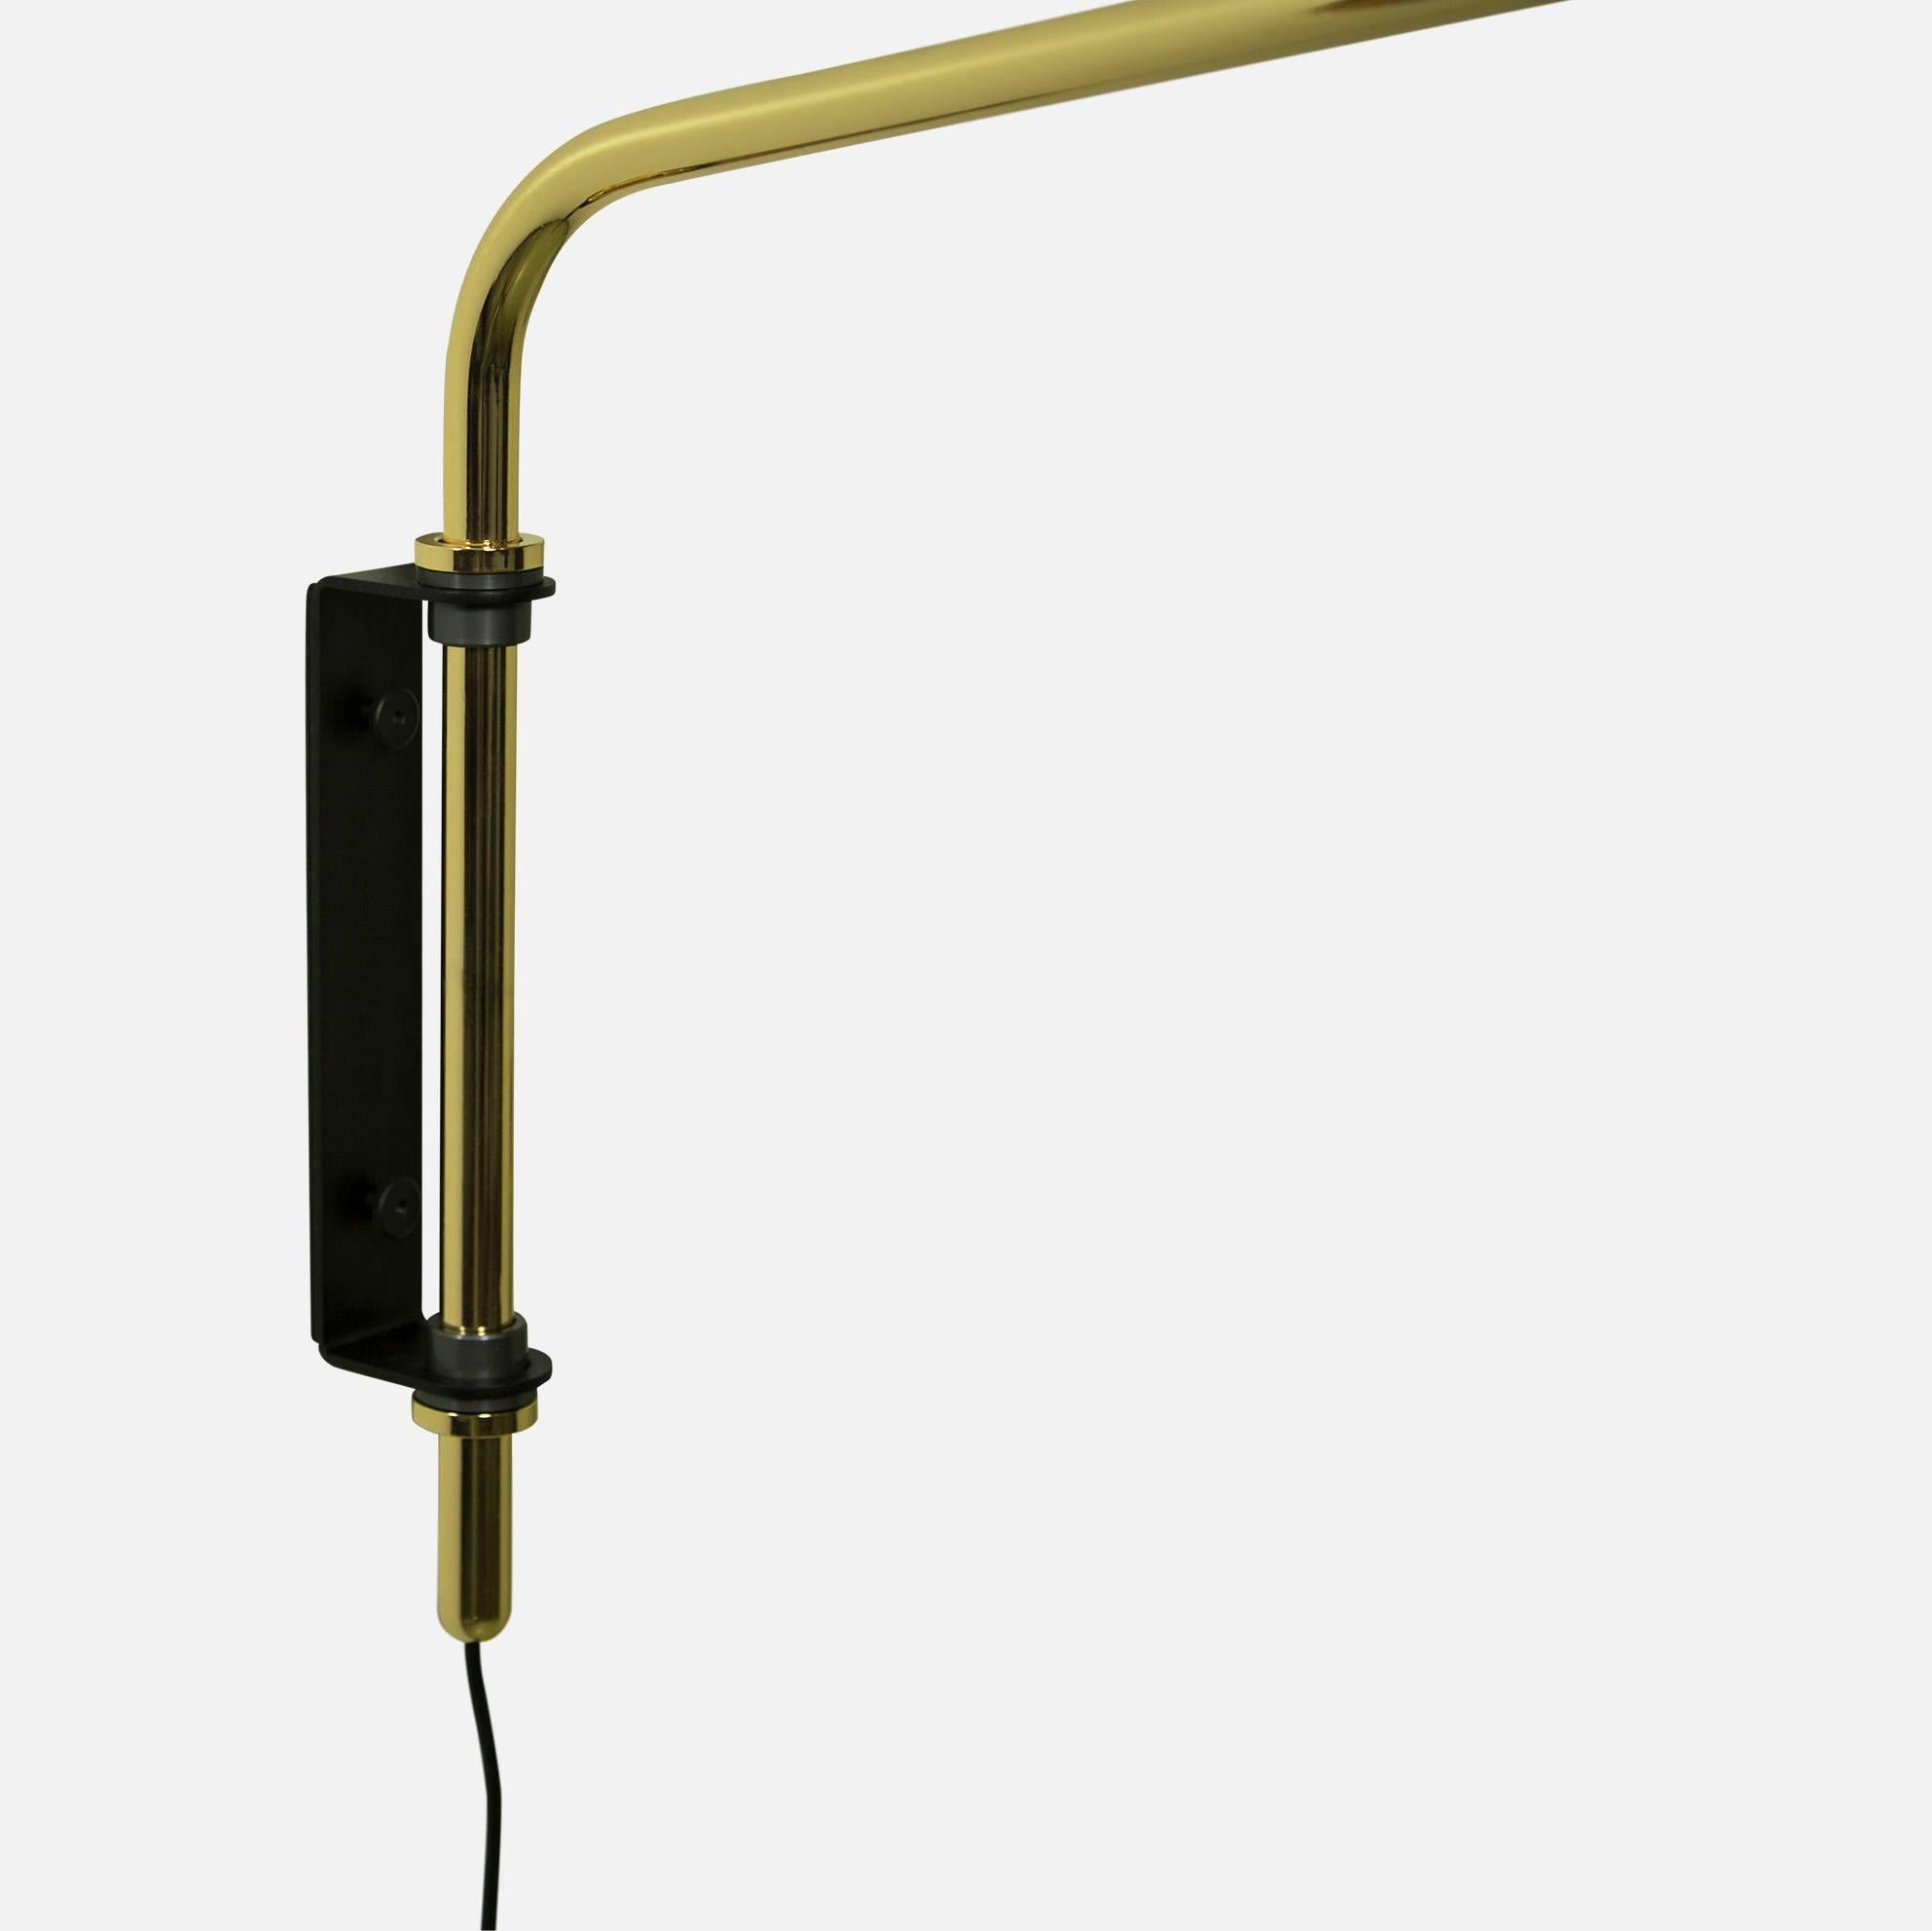 American Signal Swing Arm Sconce in Brass, Long, from Souda, Made to Order For Sale